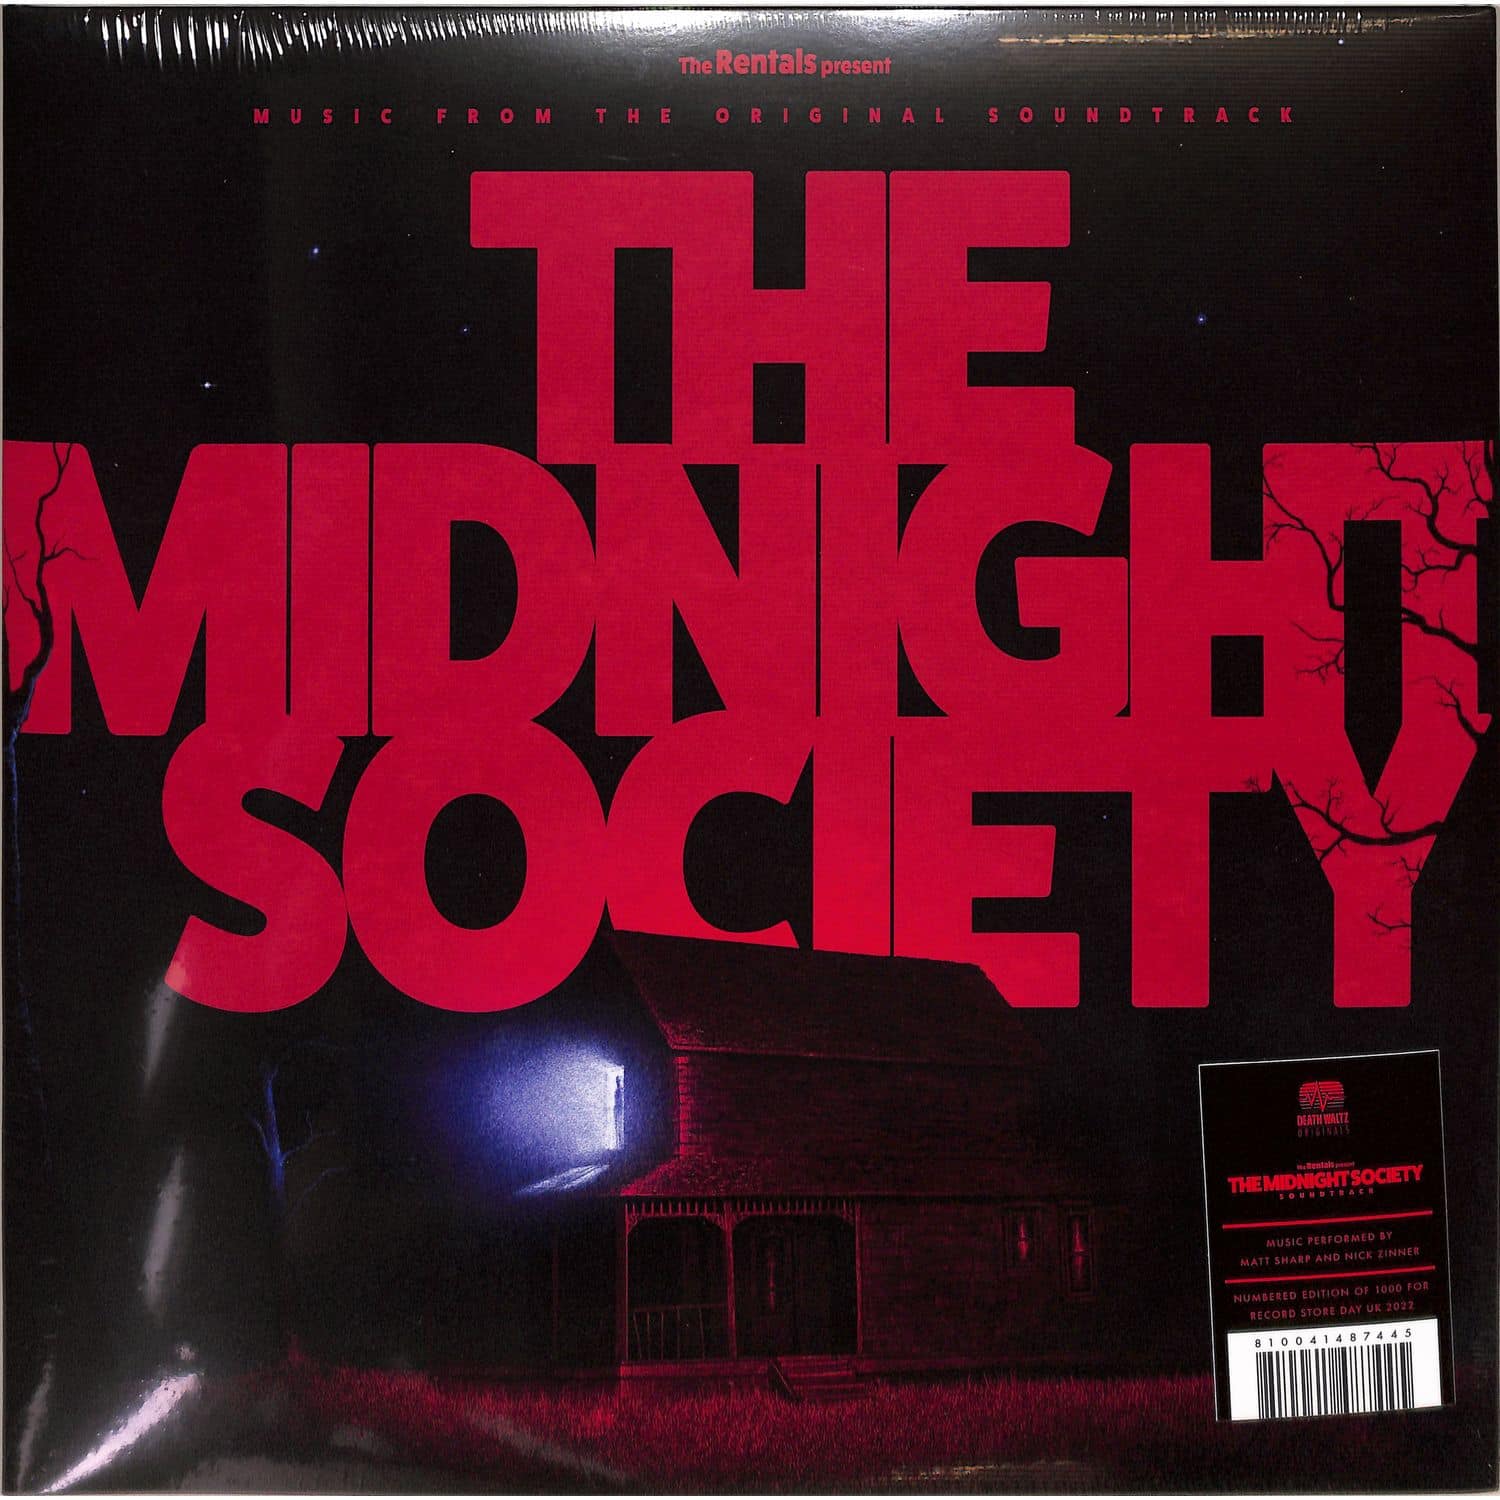 The Rentals - THE MIDNIGHT SOCIETY SOUNDTRACK 